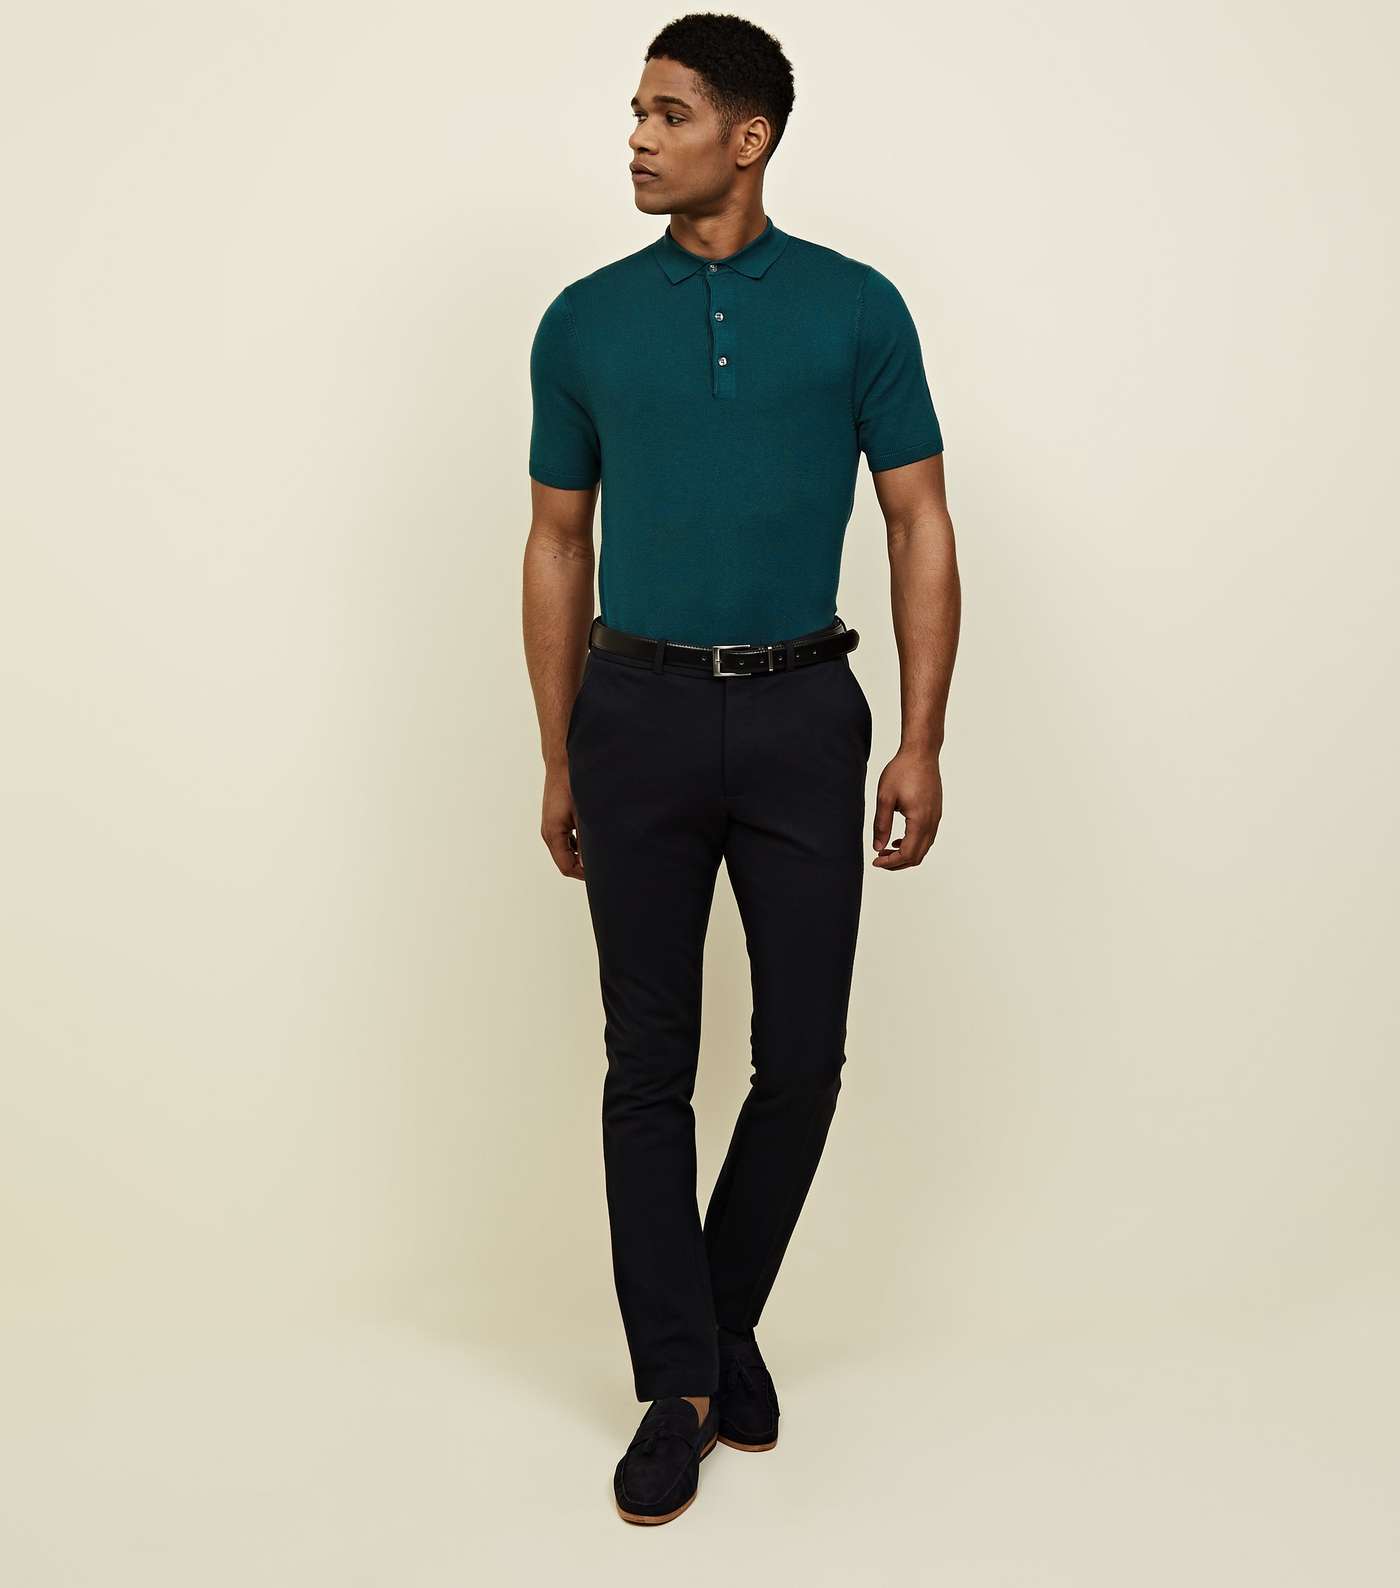 Teal Knit Muscle Fit Polo Shirt Image 5